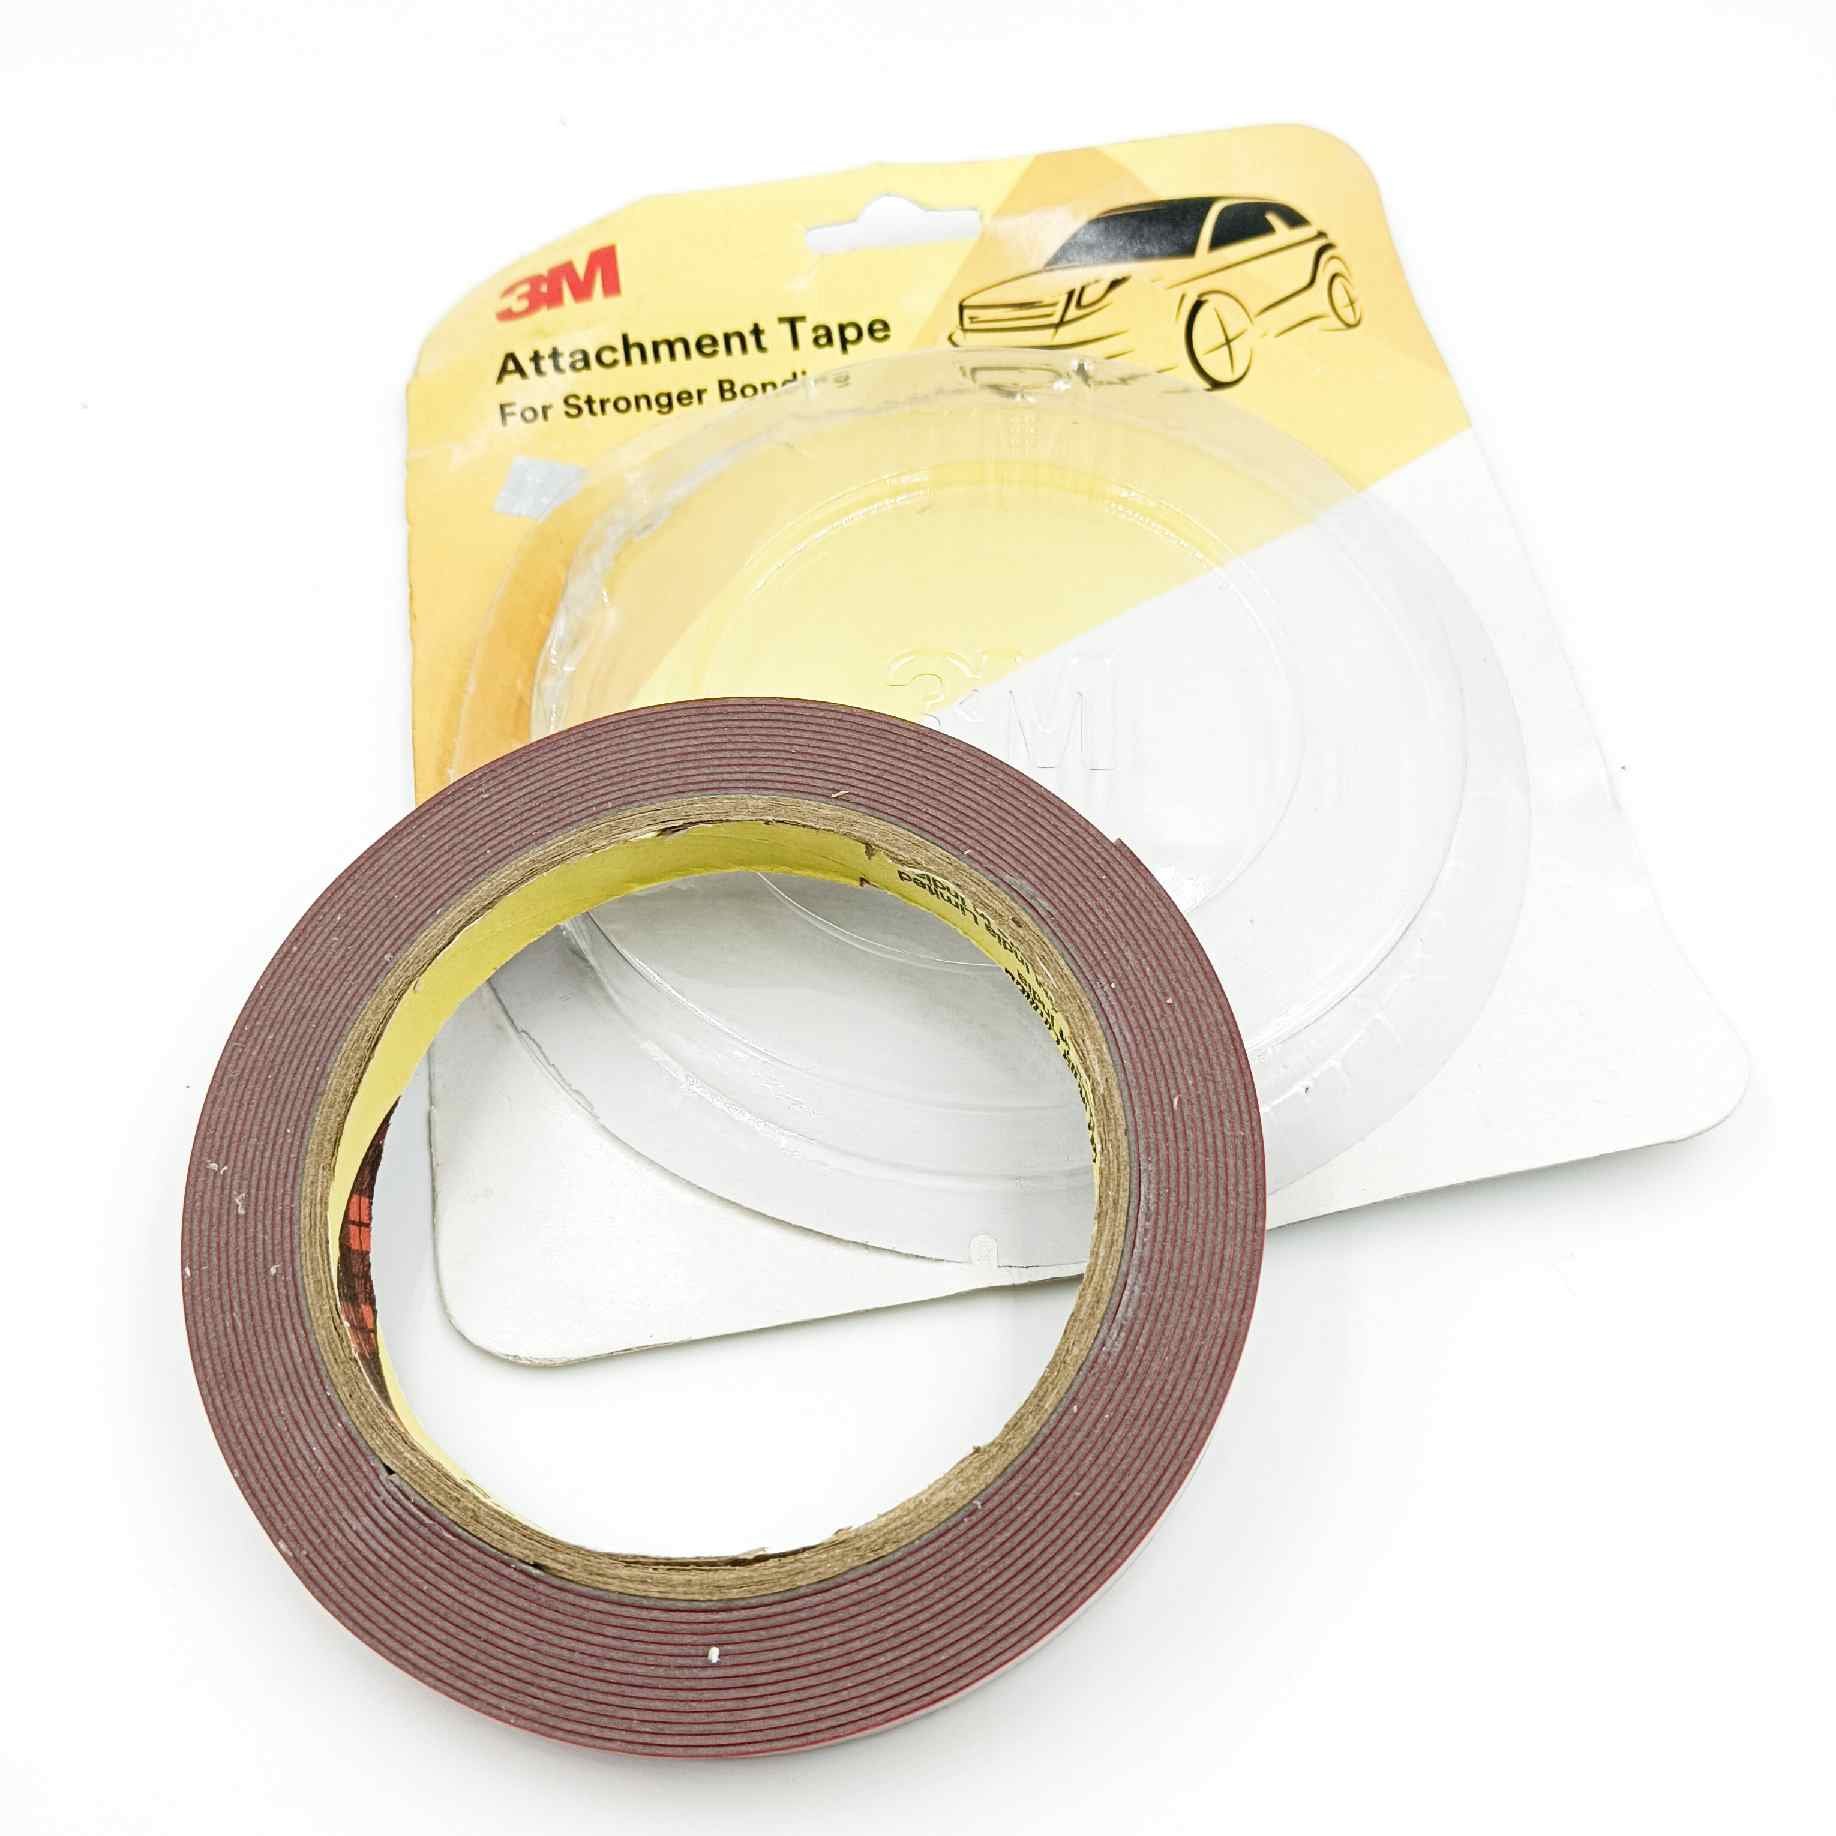 3M Attachment Tape for Stronger Bonding, Interior & Exterior Use in  Automotive Areas with Double Side Acrylic Foam Tape, Superior Adhesive,  Versatile